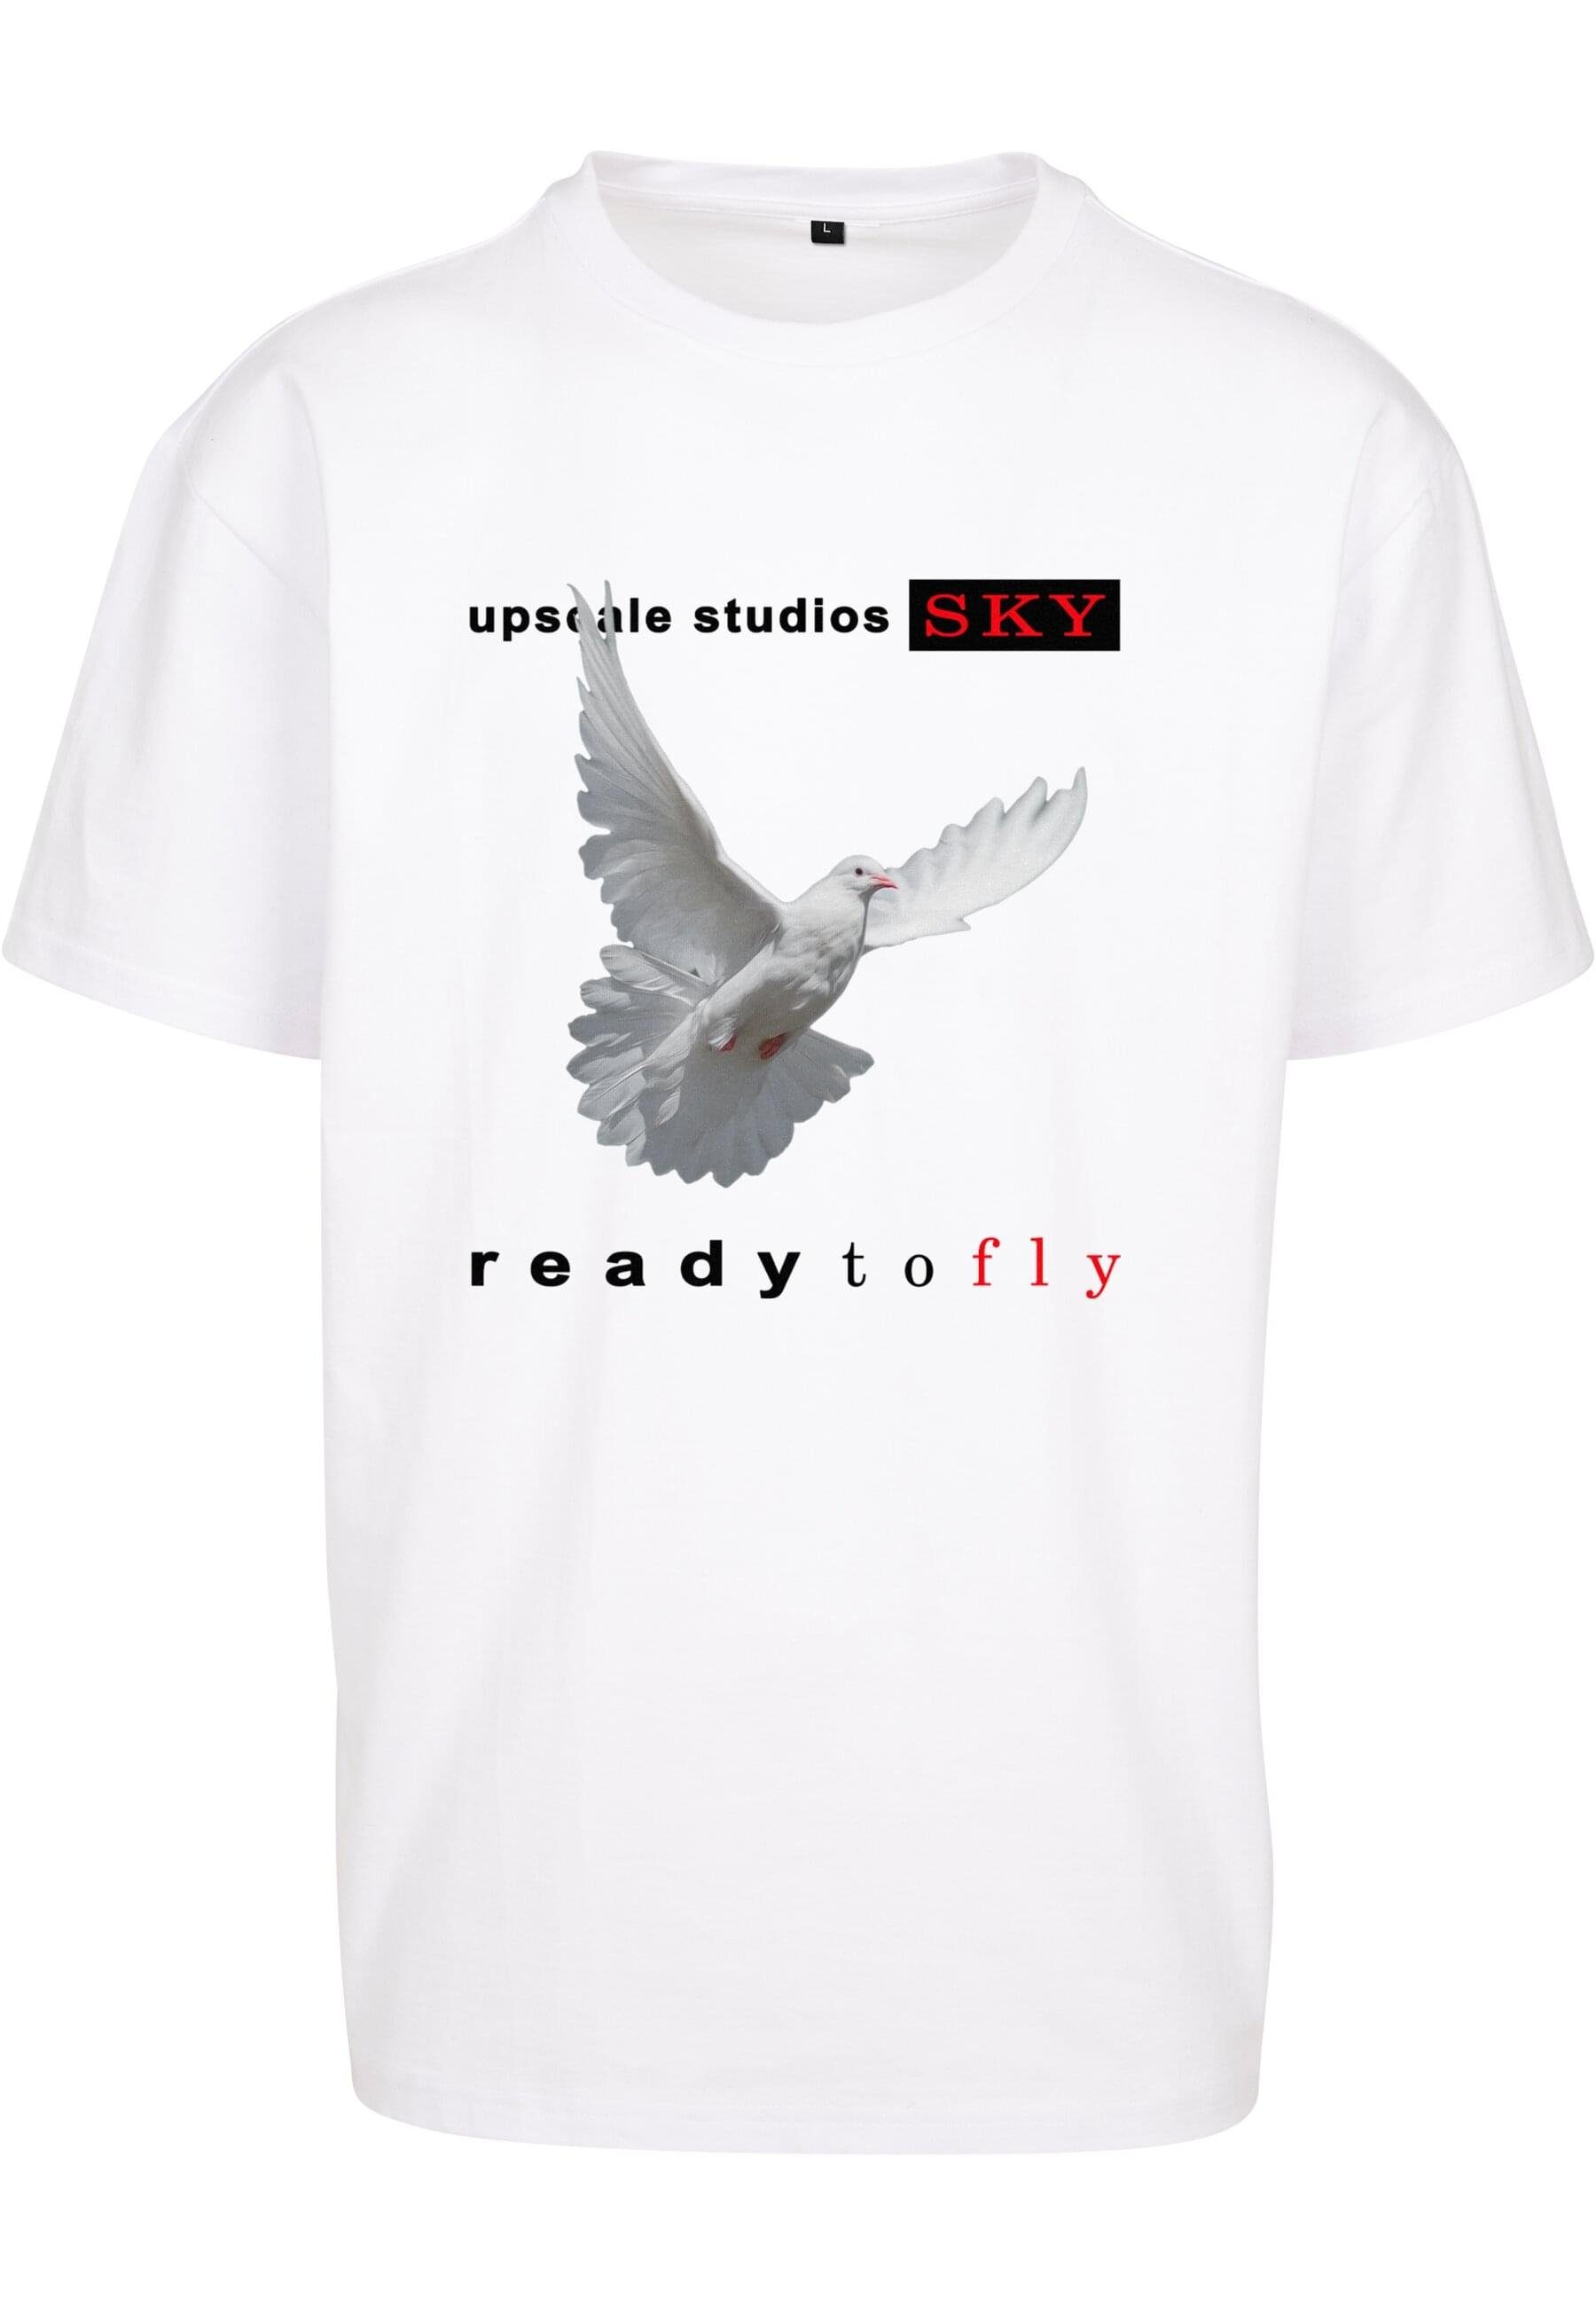 (1-tlg) T-Shirt Tee Ready Oversize fly Mister Upscale by to white Tee Unisex